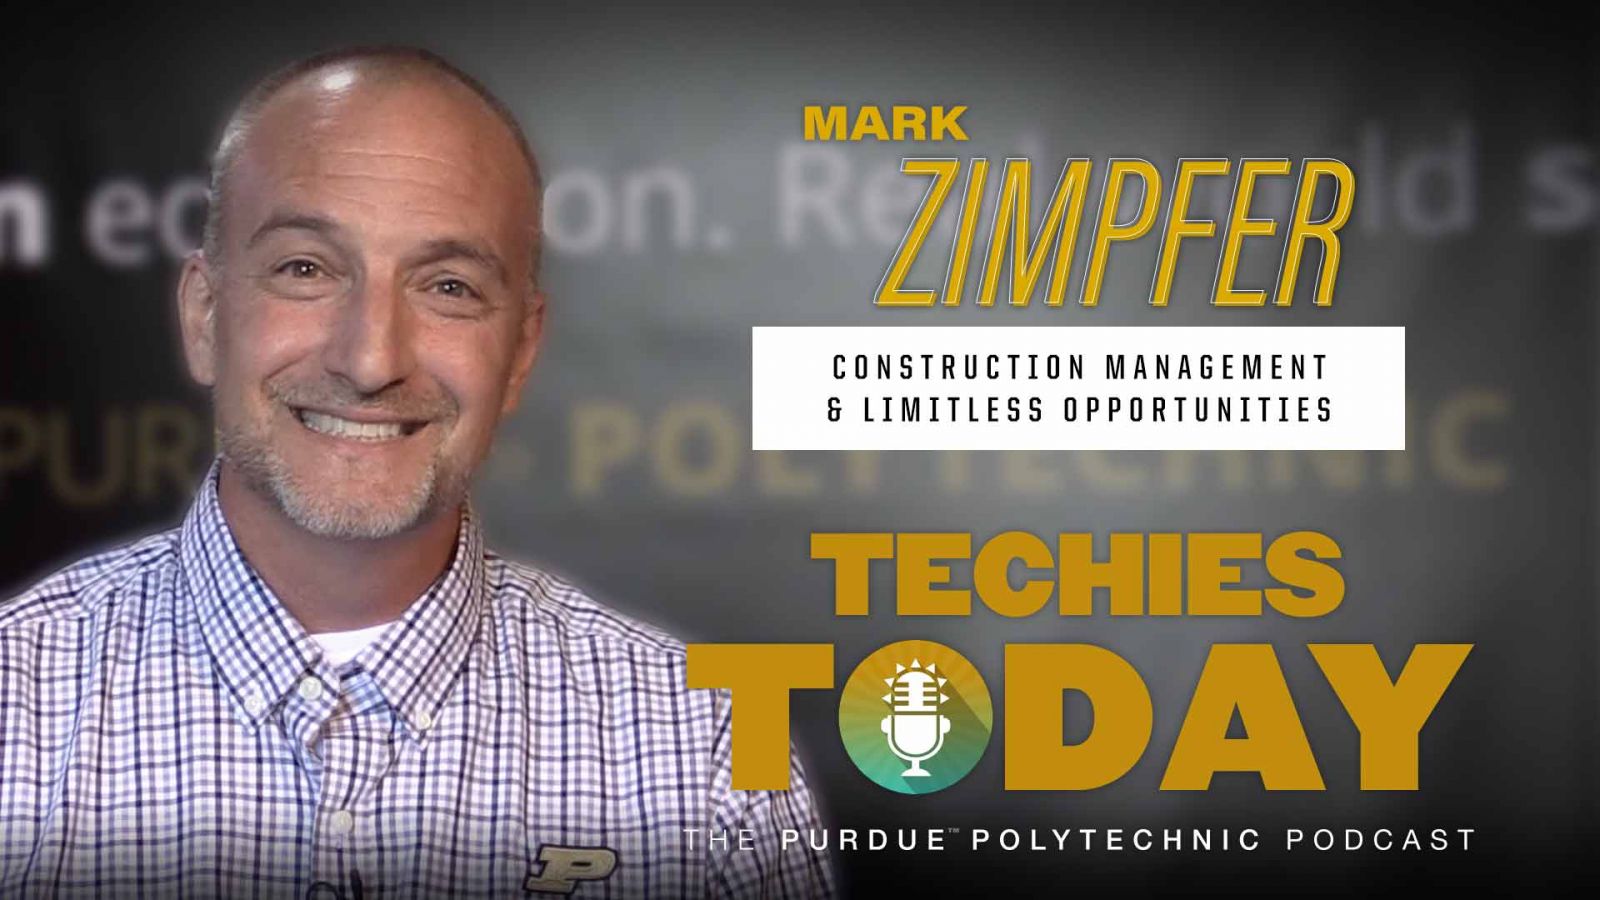 Mark Zimpfer, Construction Management & Limitless Opportunities, on Techies Today, the Purdue Polytechnic Podcast